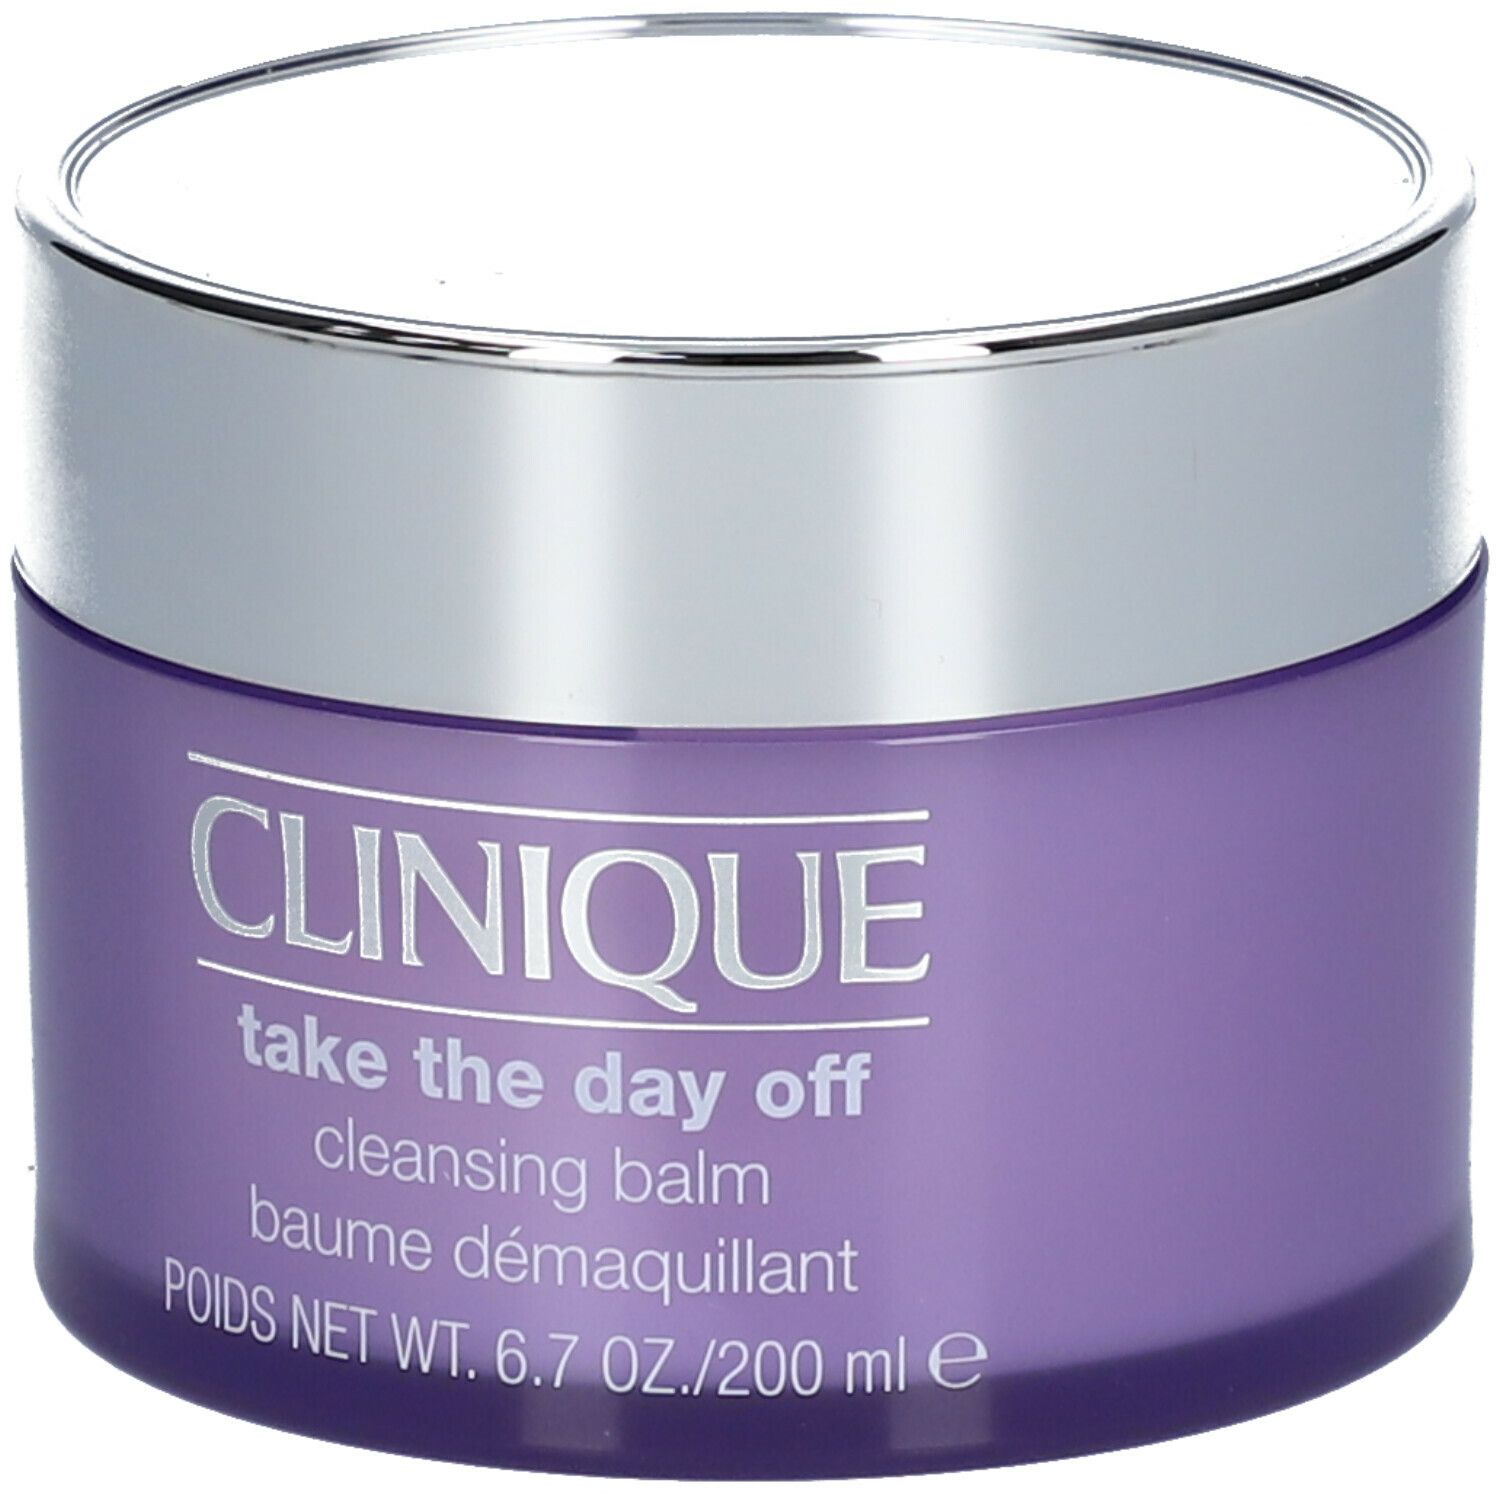 Day Balm ml The Make-up-Entferner Off™ CLINIQUE 200 Cleansing Take